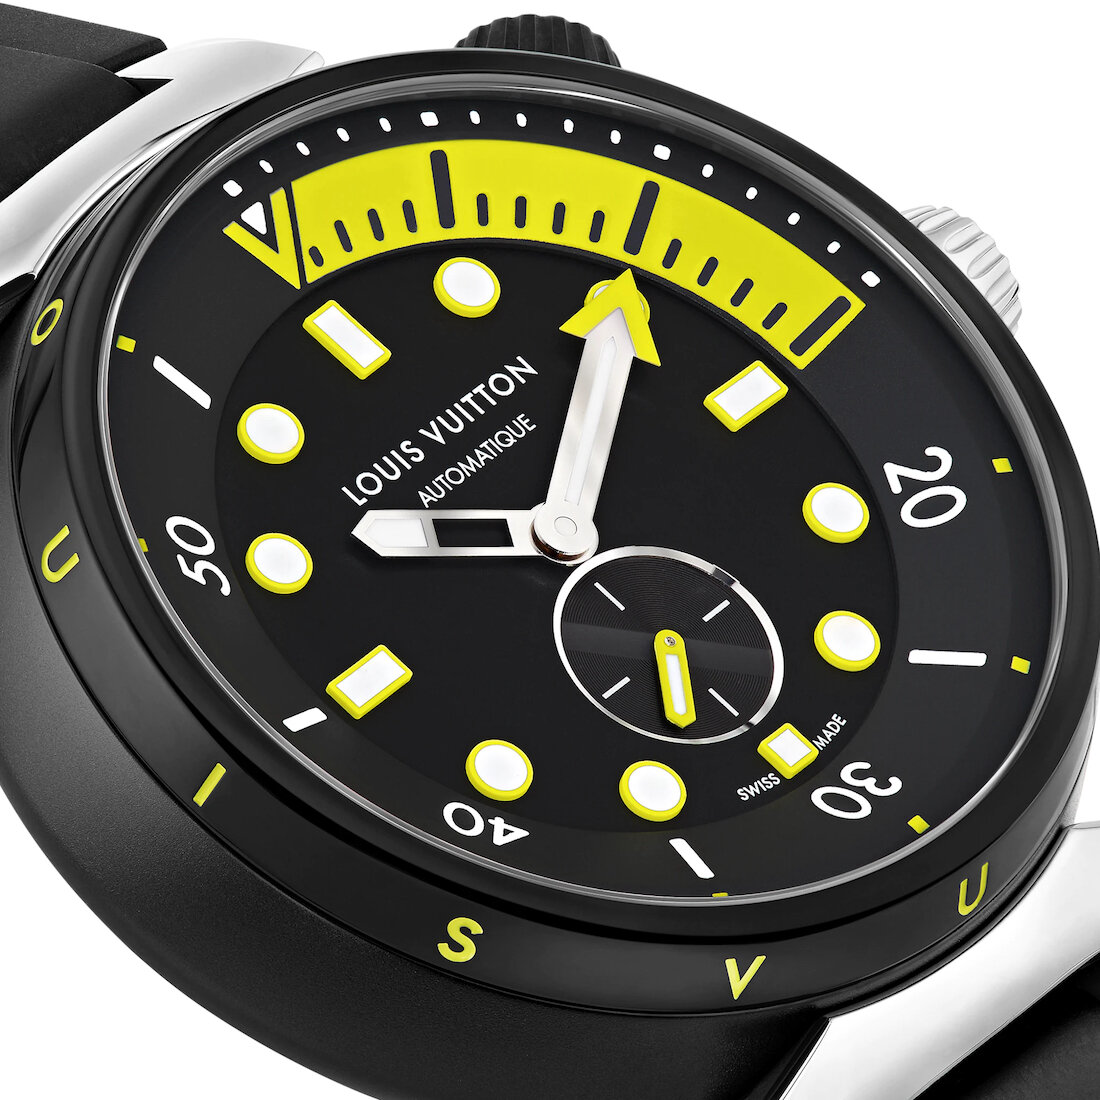 W&W 2021: Louis Vuitton Tambour Street Diver. Four Colorful Models to  Please Everyone's Wrist. — WATCH COLLECTING LIFESTYLE